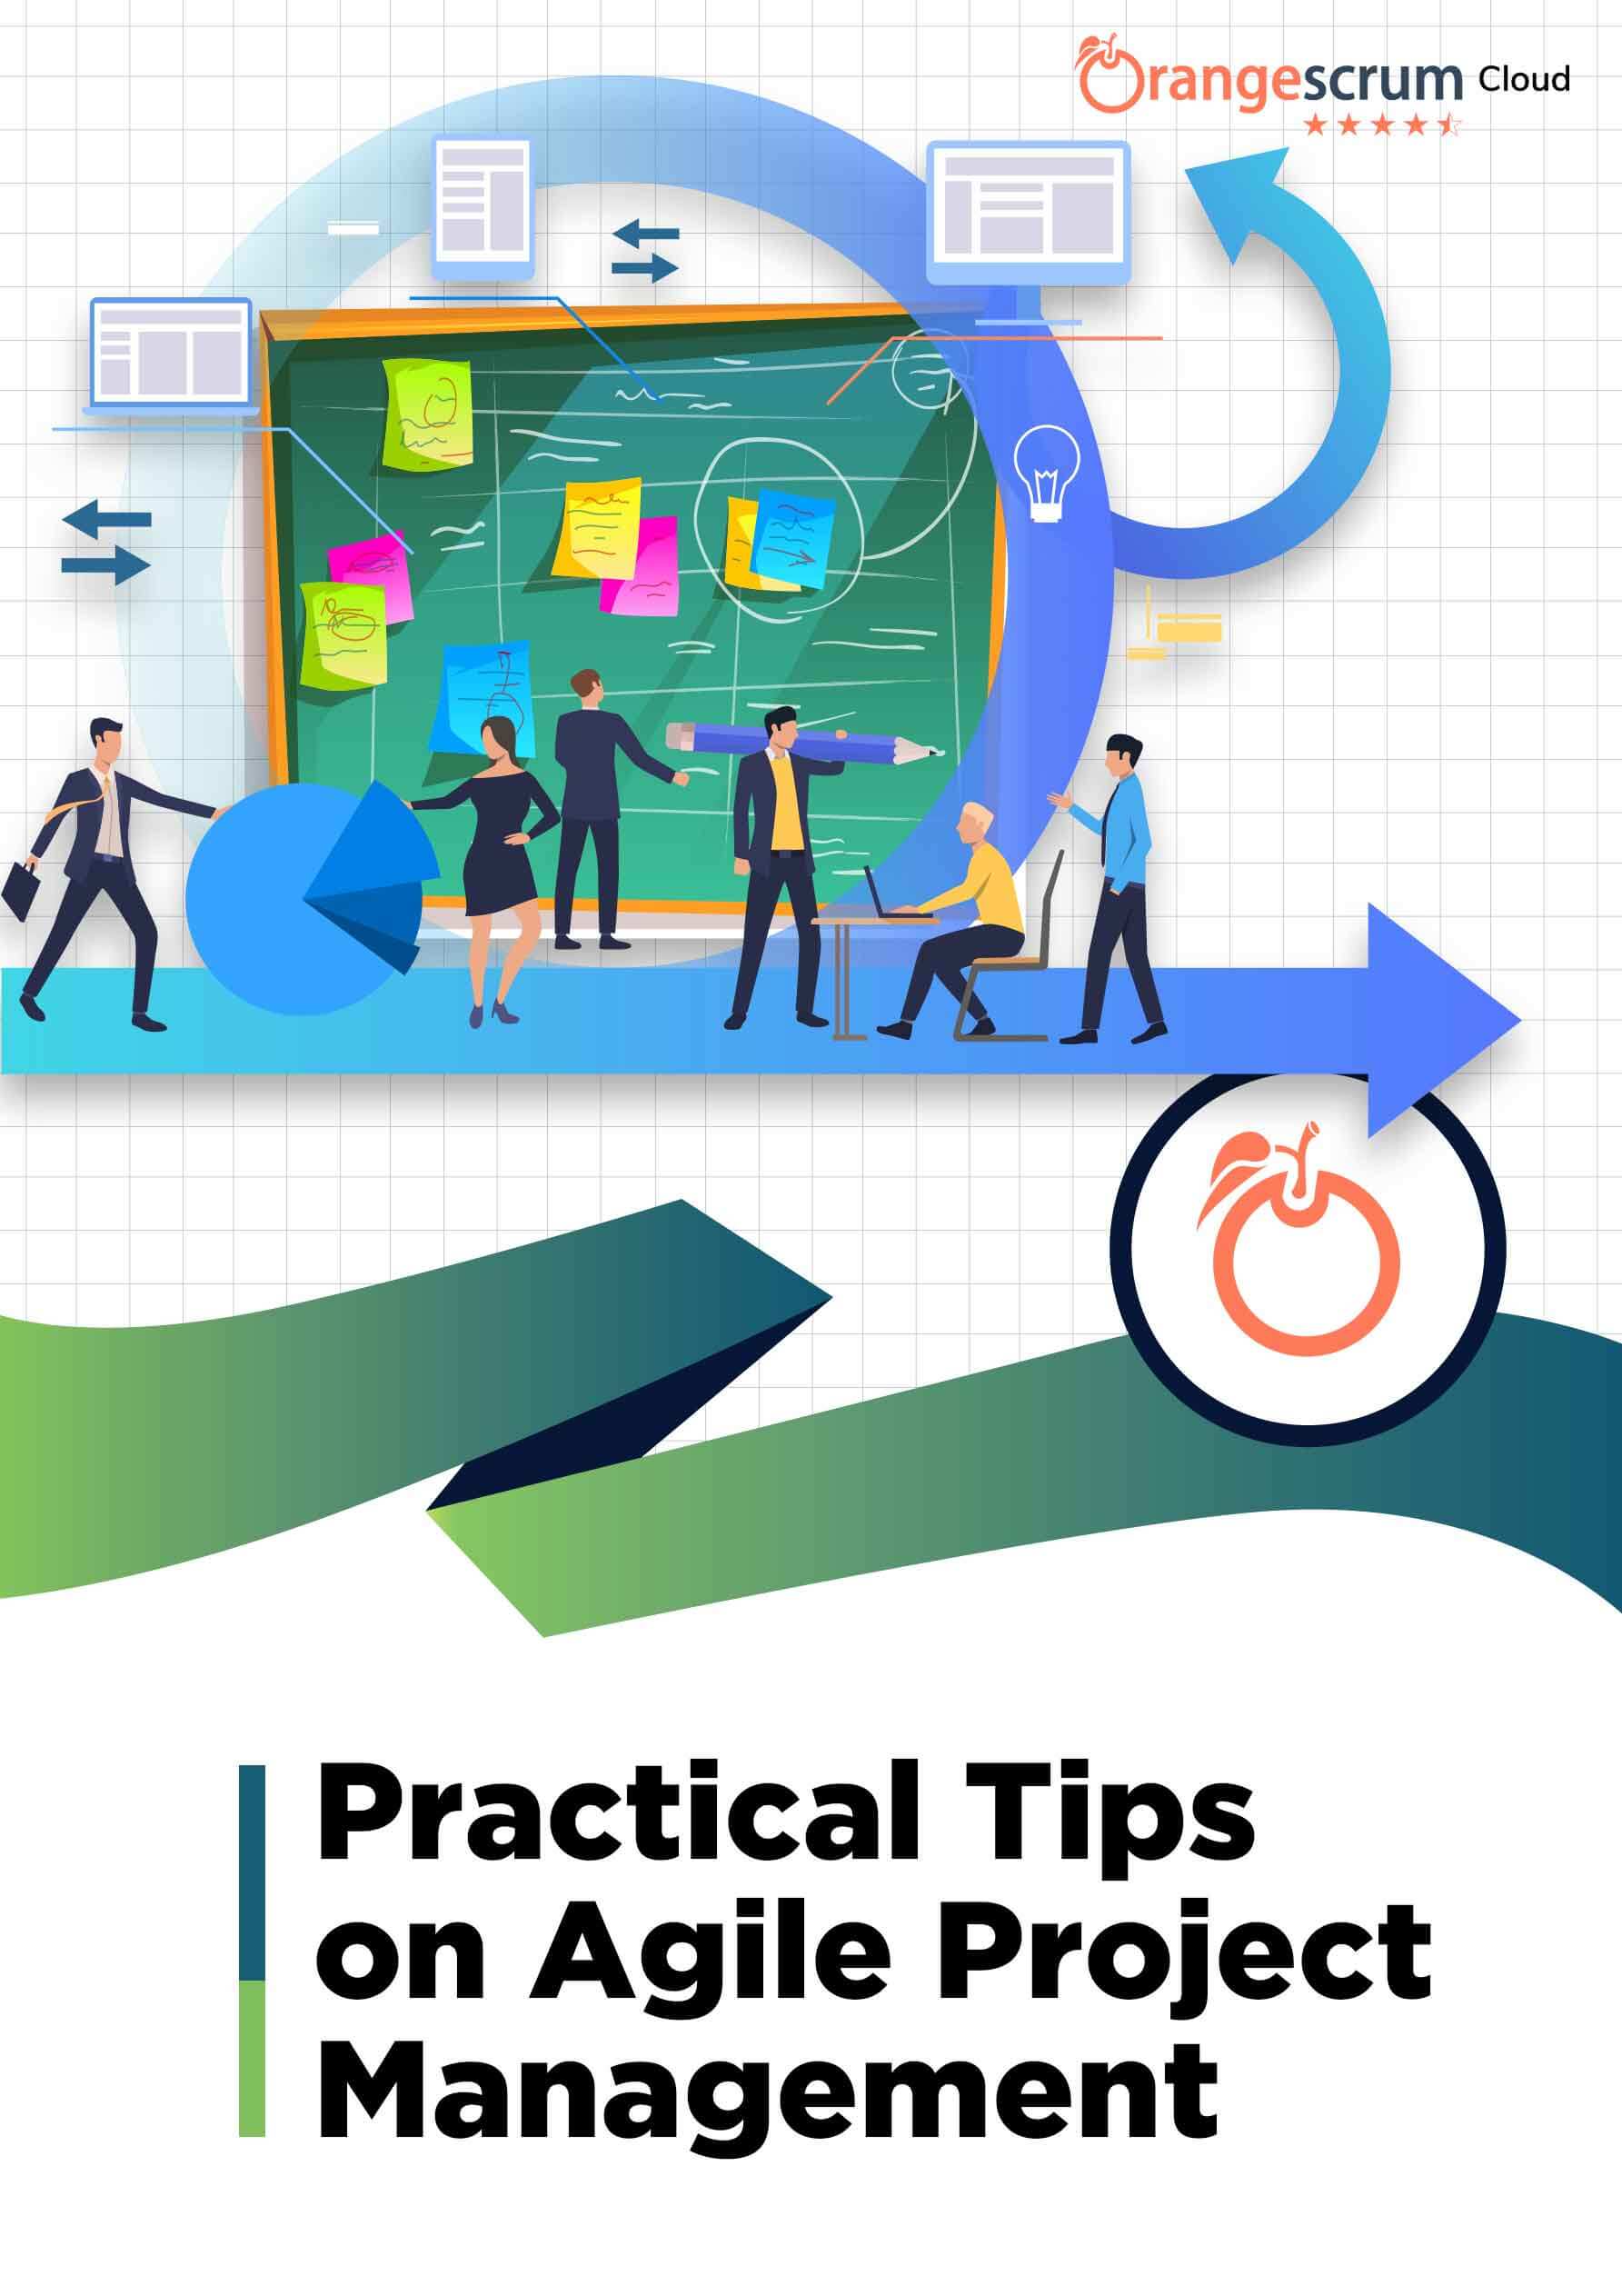 Practical Tips on Agile Project Management